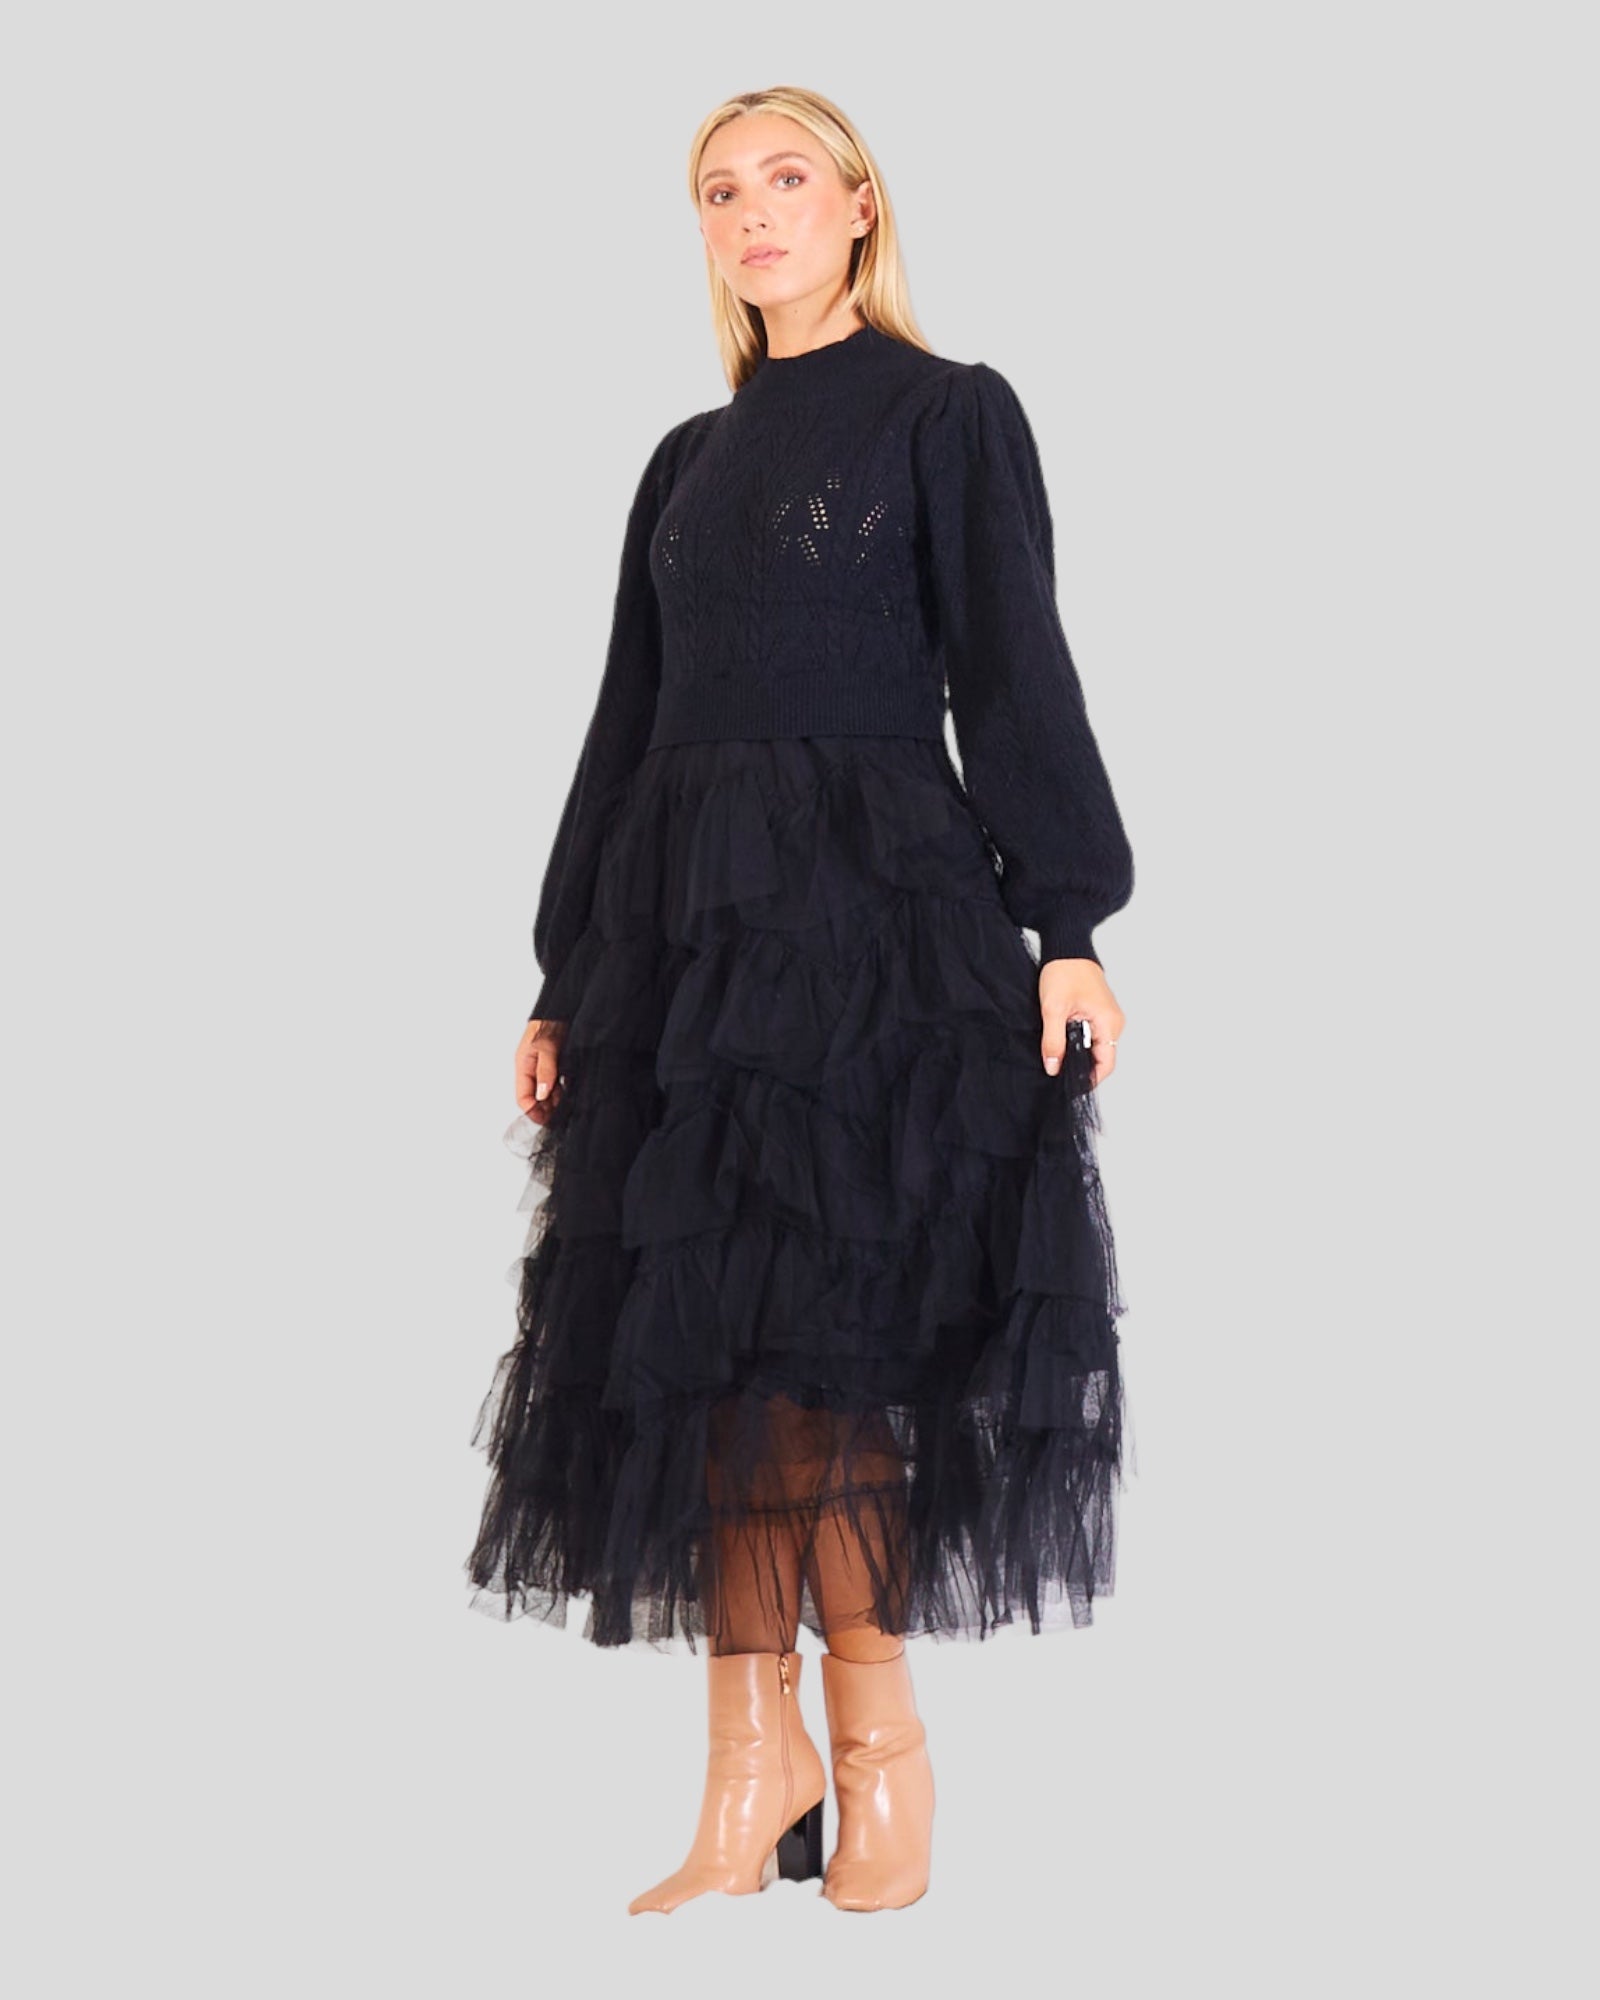 Women's Sweater in a delightful black . The design combines the sophistication of a knitted sweater on the upper part with playful tulle ball dress ruffles adorning the skirt. Evoking the iconic "Sex and the City" style, this fashion-forward piece seamlessly blends comfort and elegance